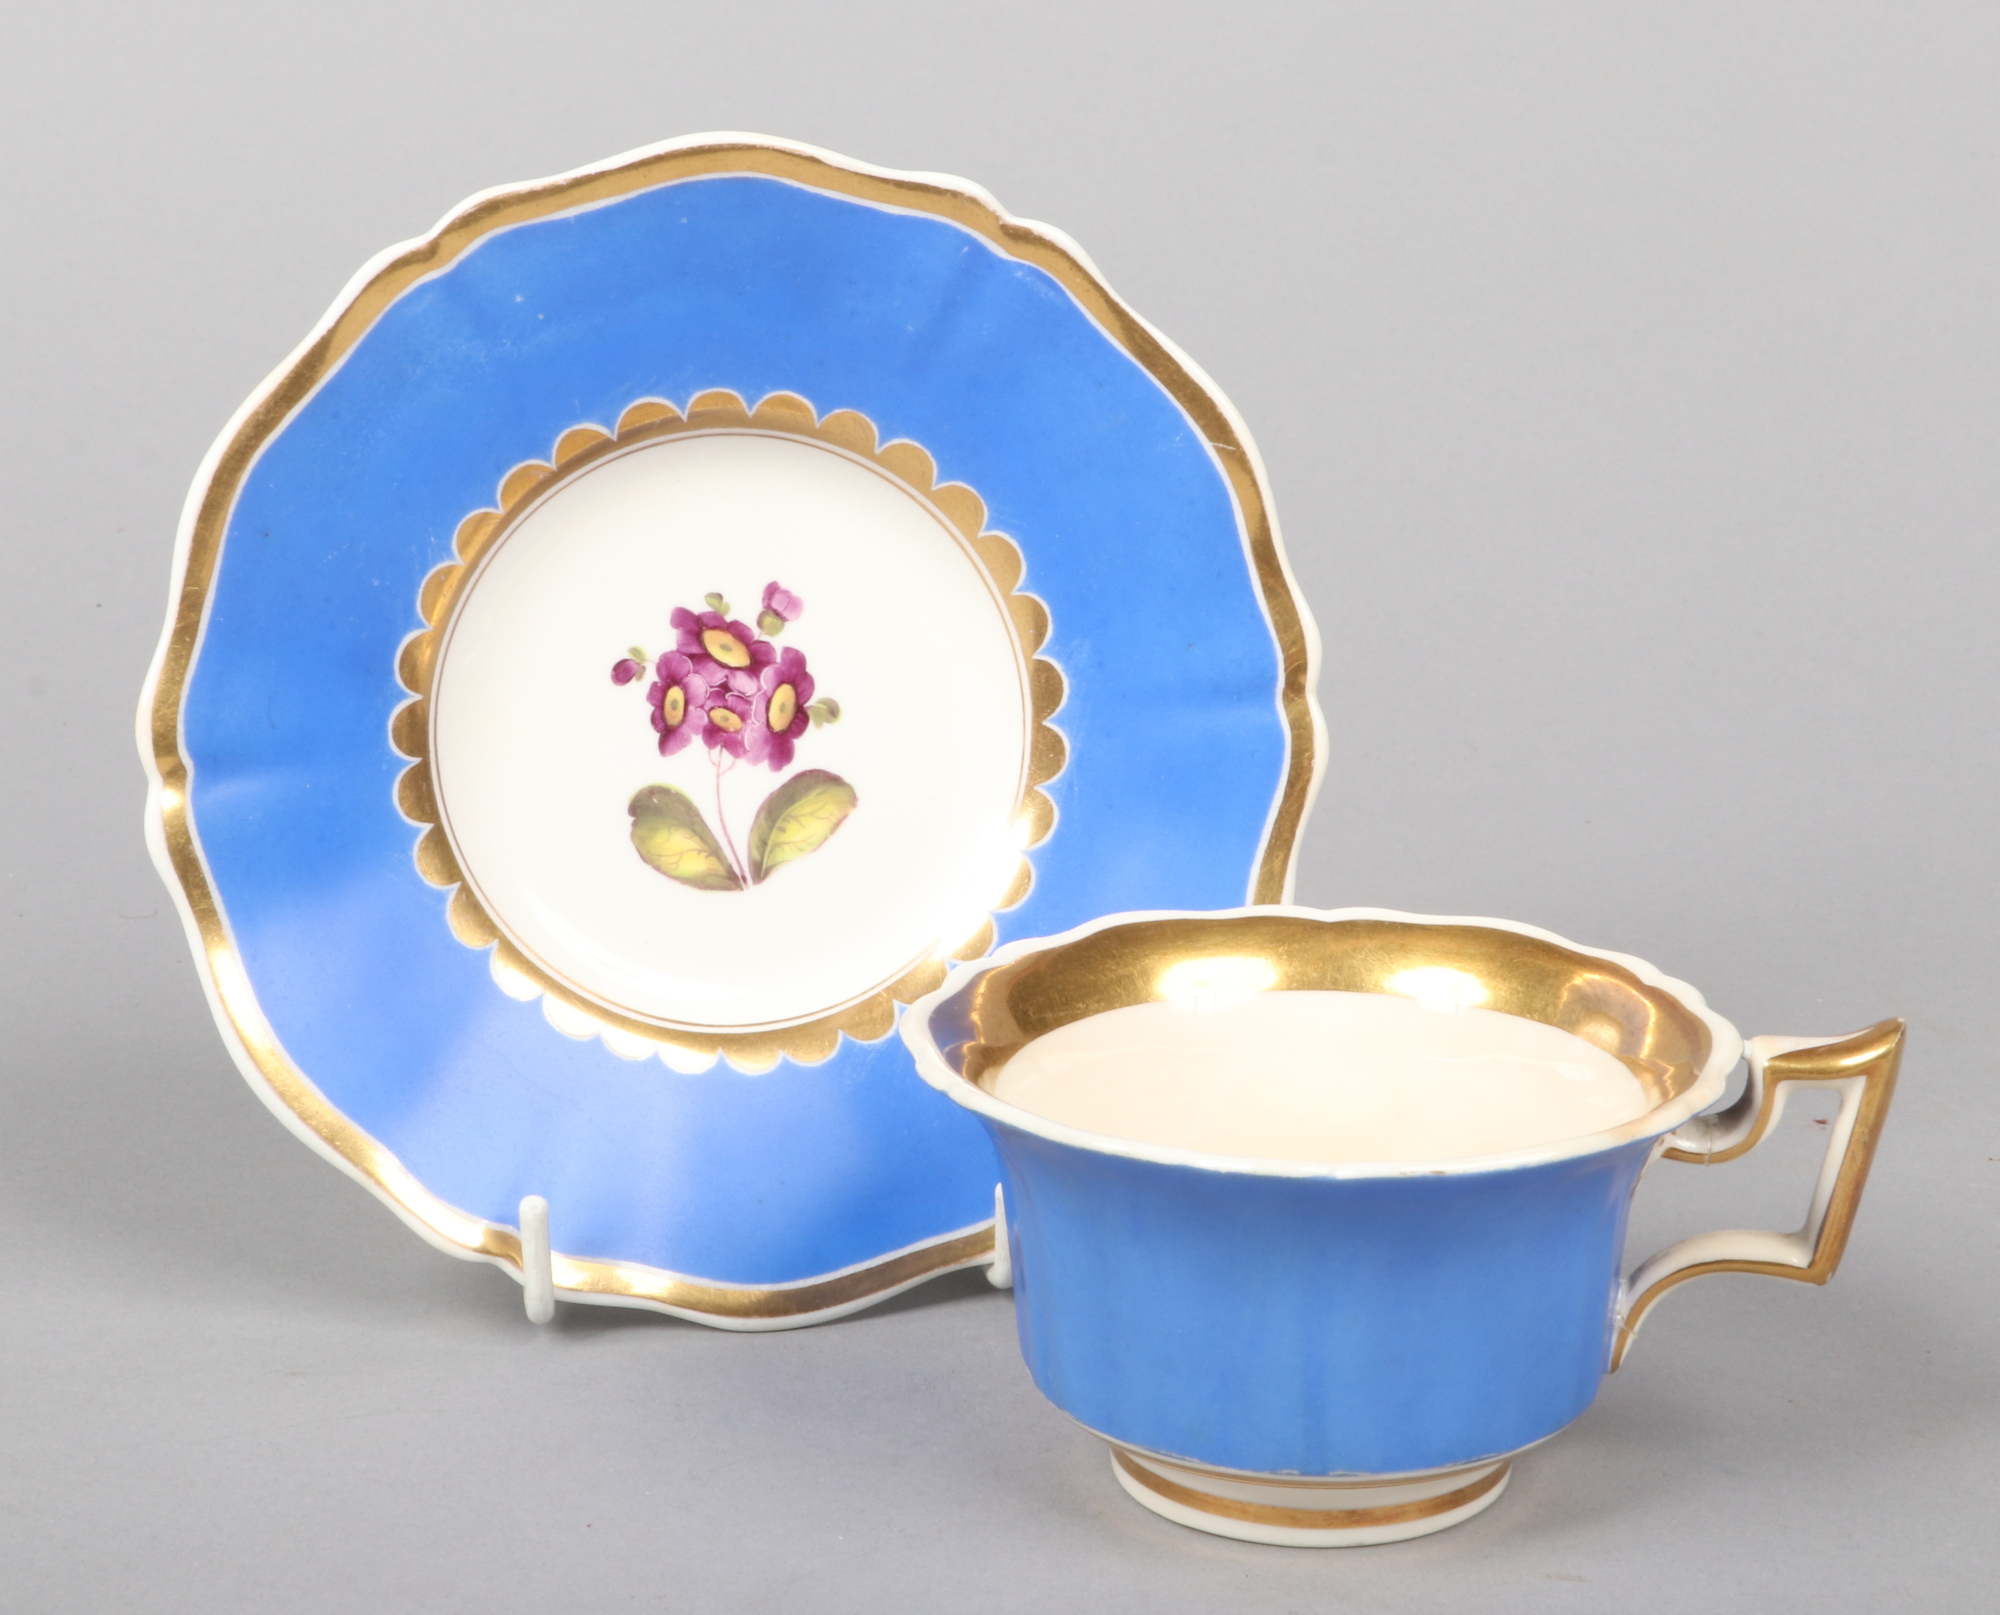 A Rockingham teacup and saucer with square handle, gilded, having blue grounds and painted with